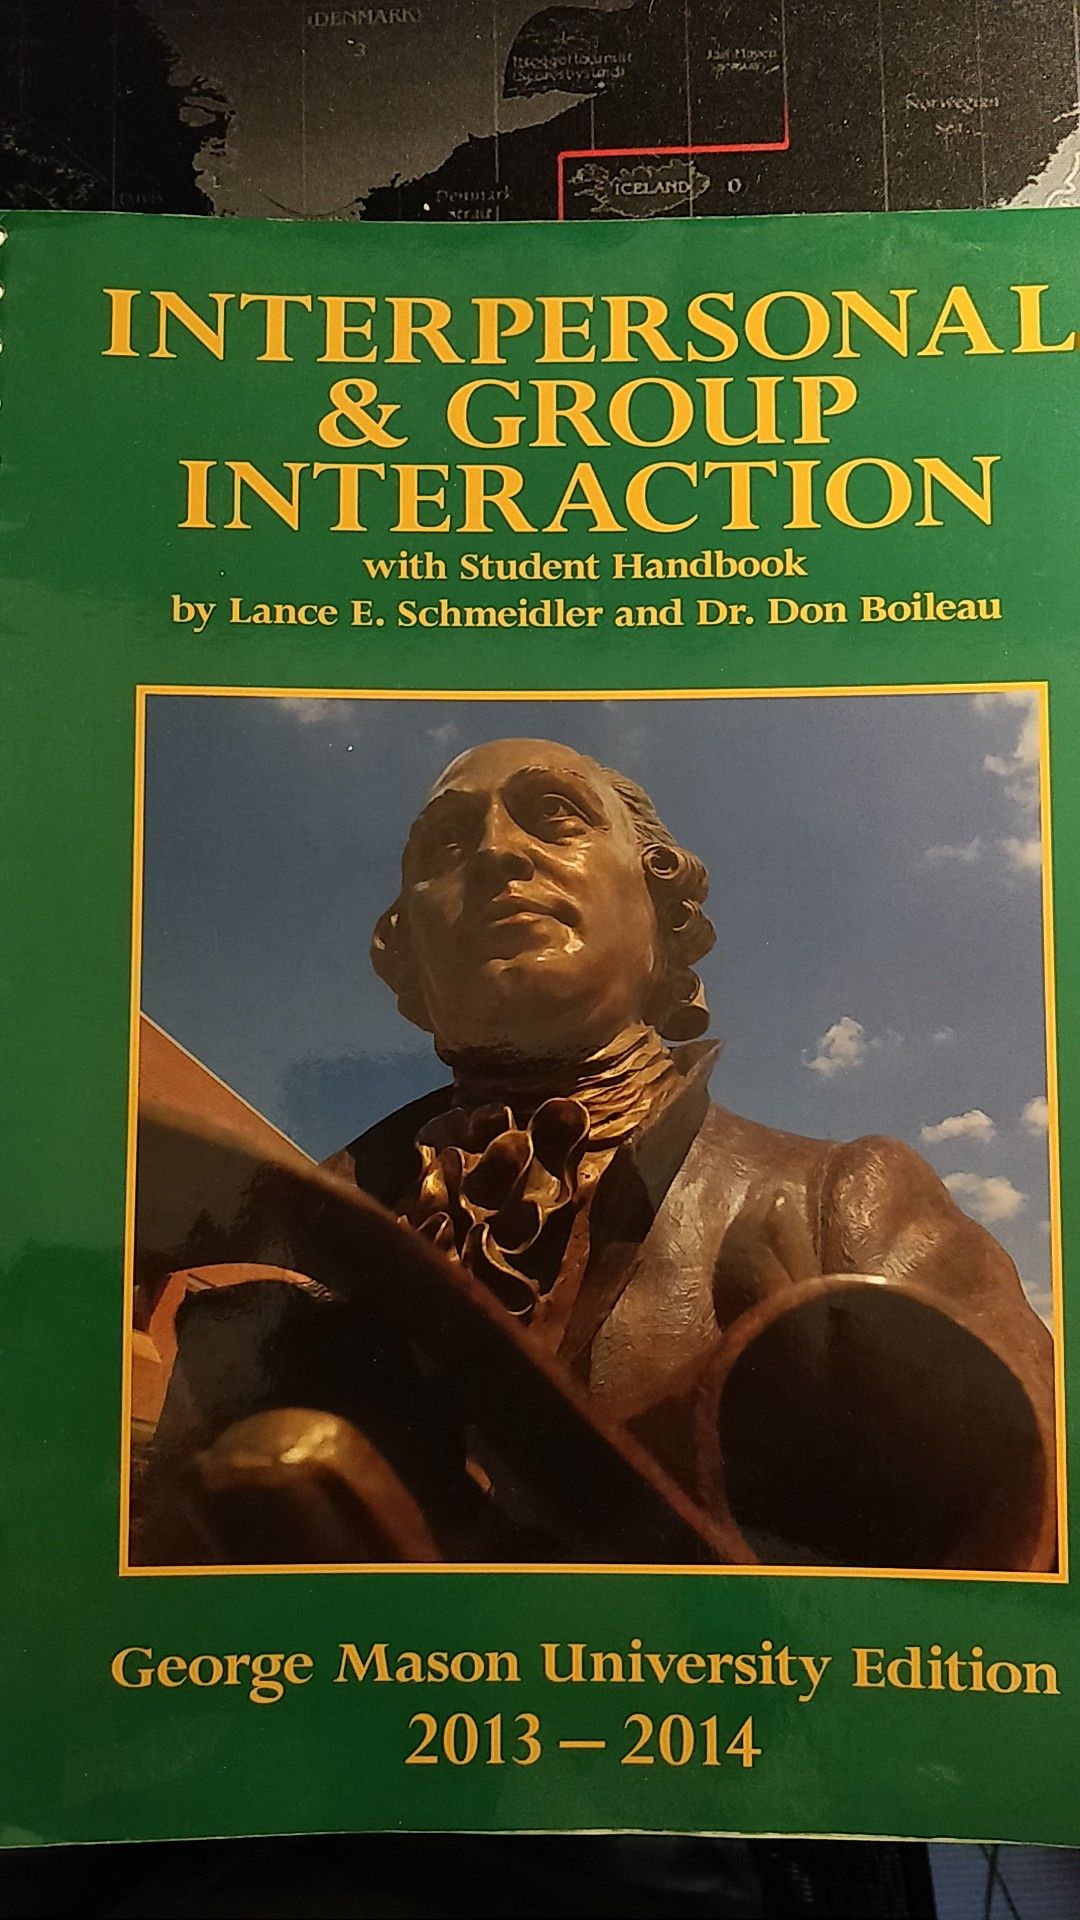 Interpersonal & Group Interaction Textbook for GMU